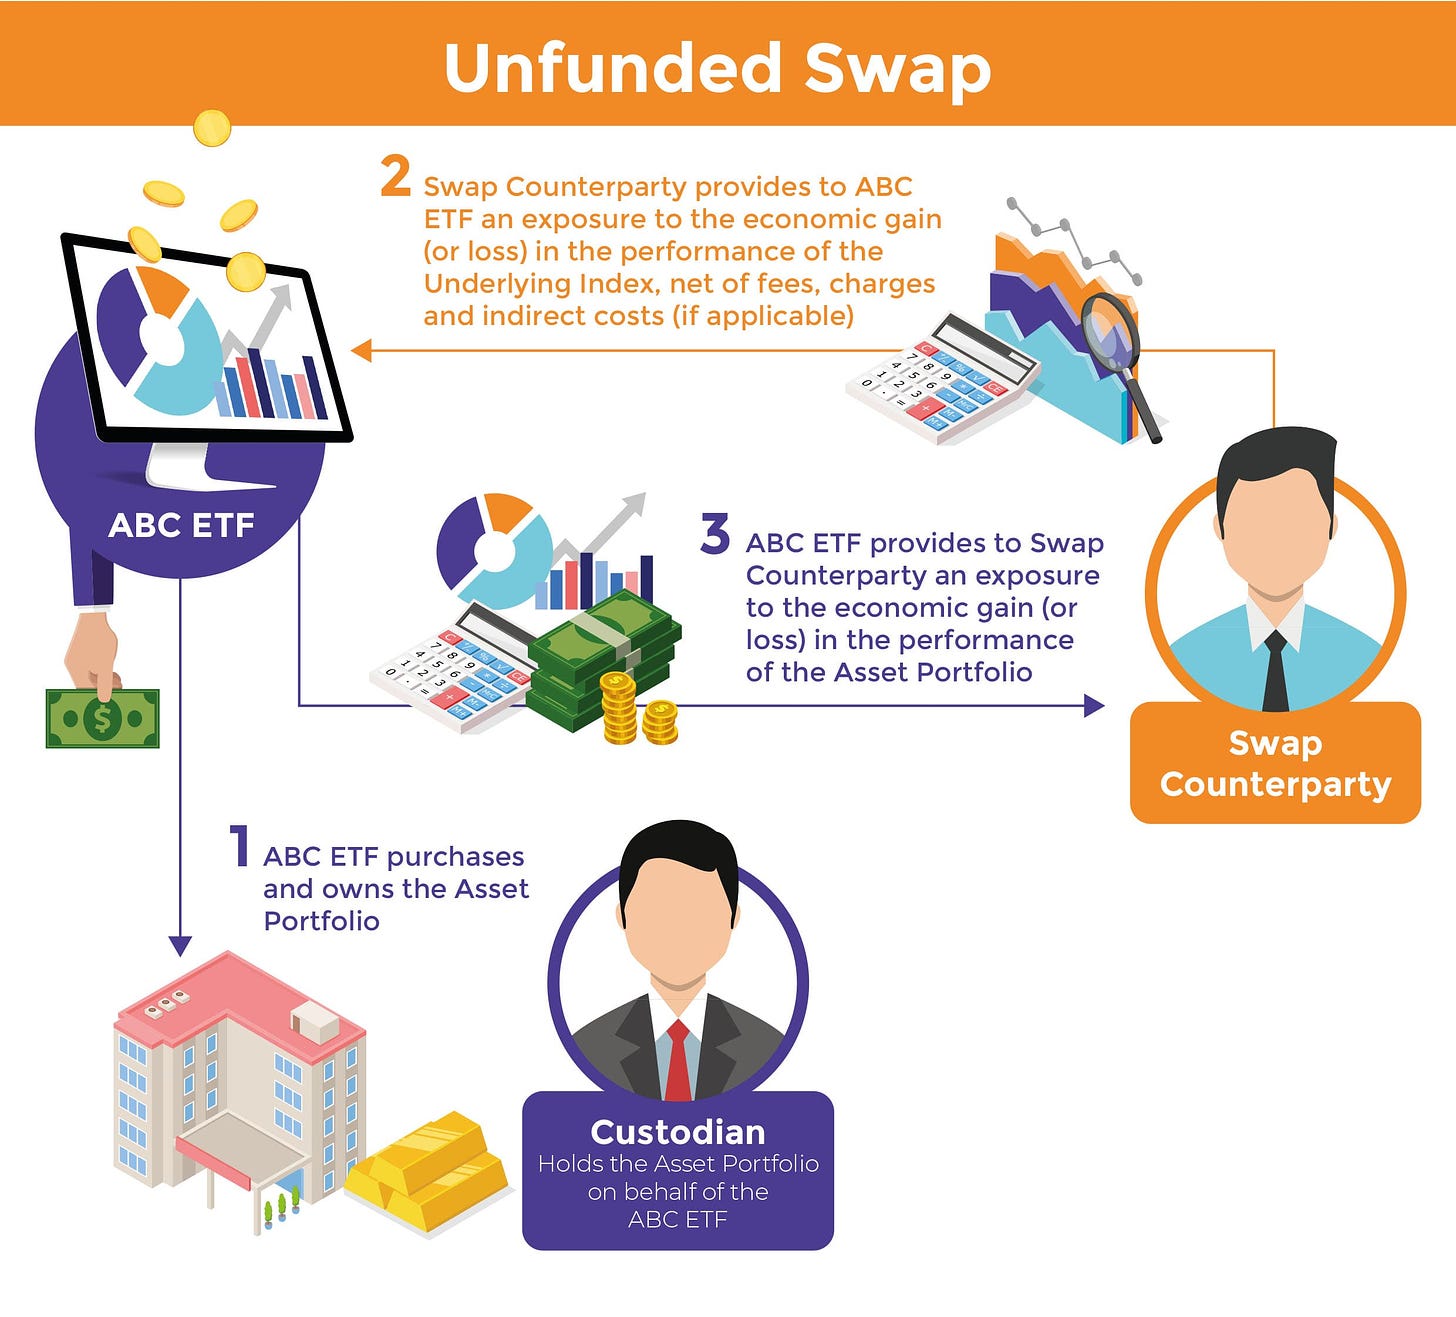 Unfunded swap